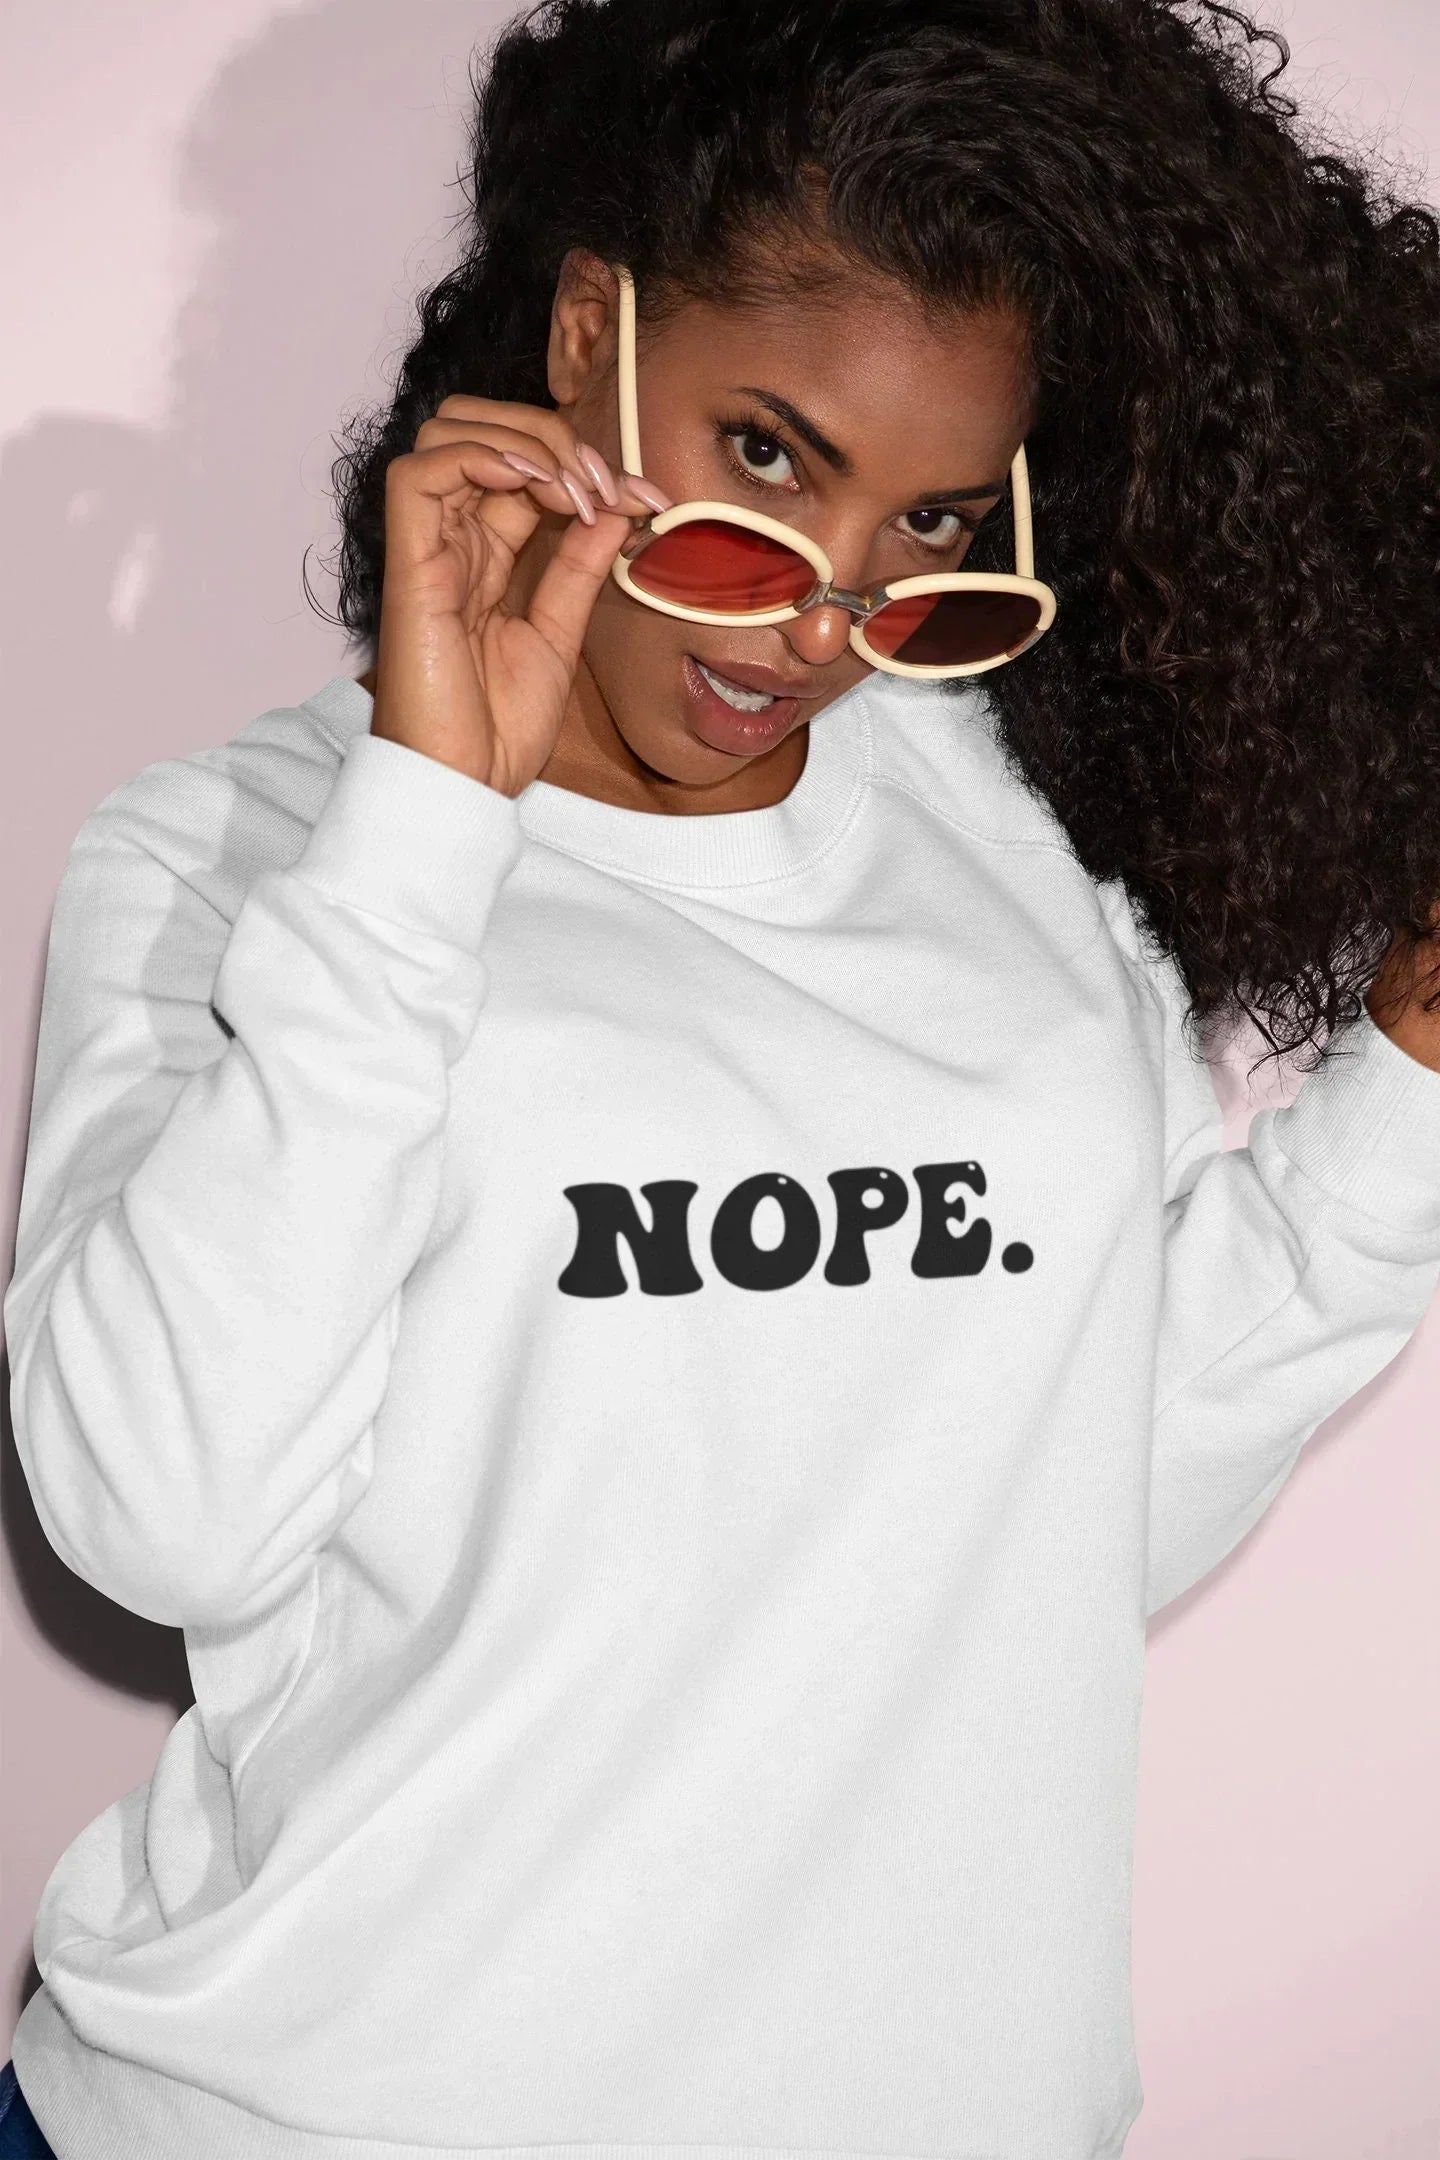 Nope Retro Shirt, Funny Sweatshirt, Cute Sassy Gift, Funny Graphic Longsleeve Tee, Funny Hoodie, Gift For Her, Sarcastic Sweater HMDesignStudioUS